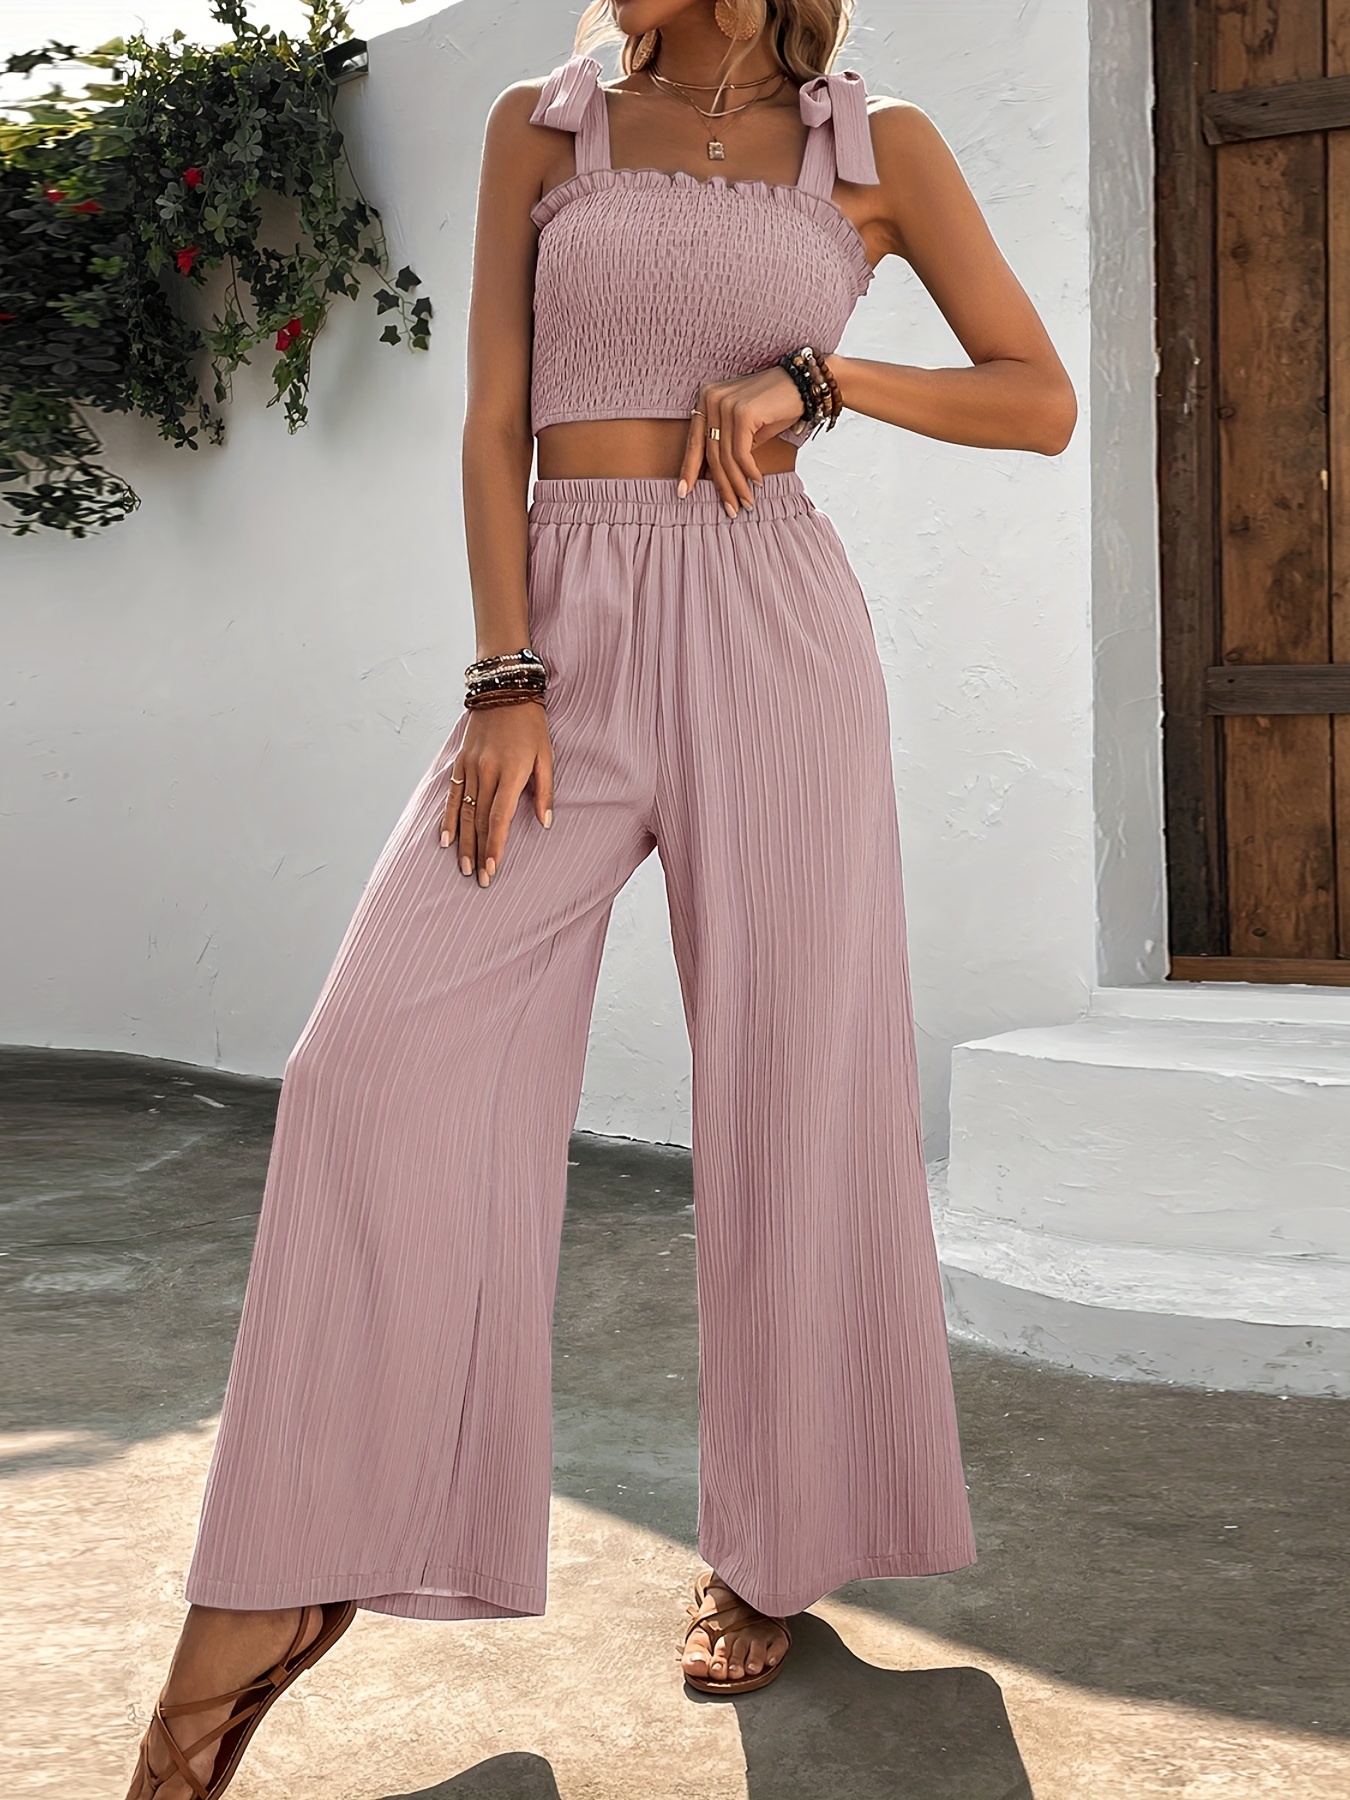 Two Piece Linen Sets for Women Solid Crop Tank Tops&Wide Leg Pants Outfits  Summer Casual Elegant 2 Piece Sets for Beach Work A02-watermelon Red Medium